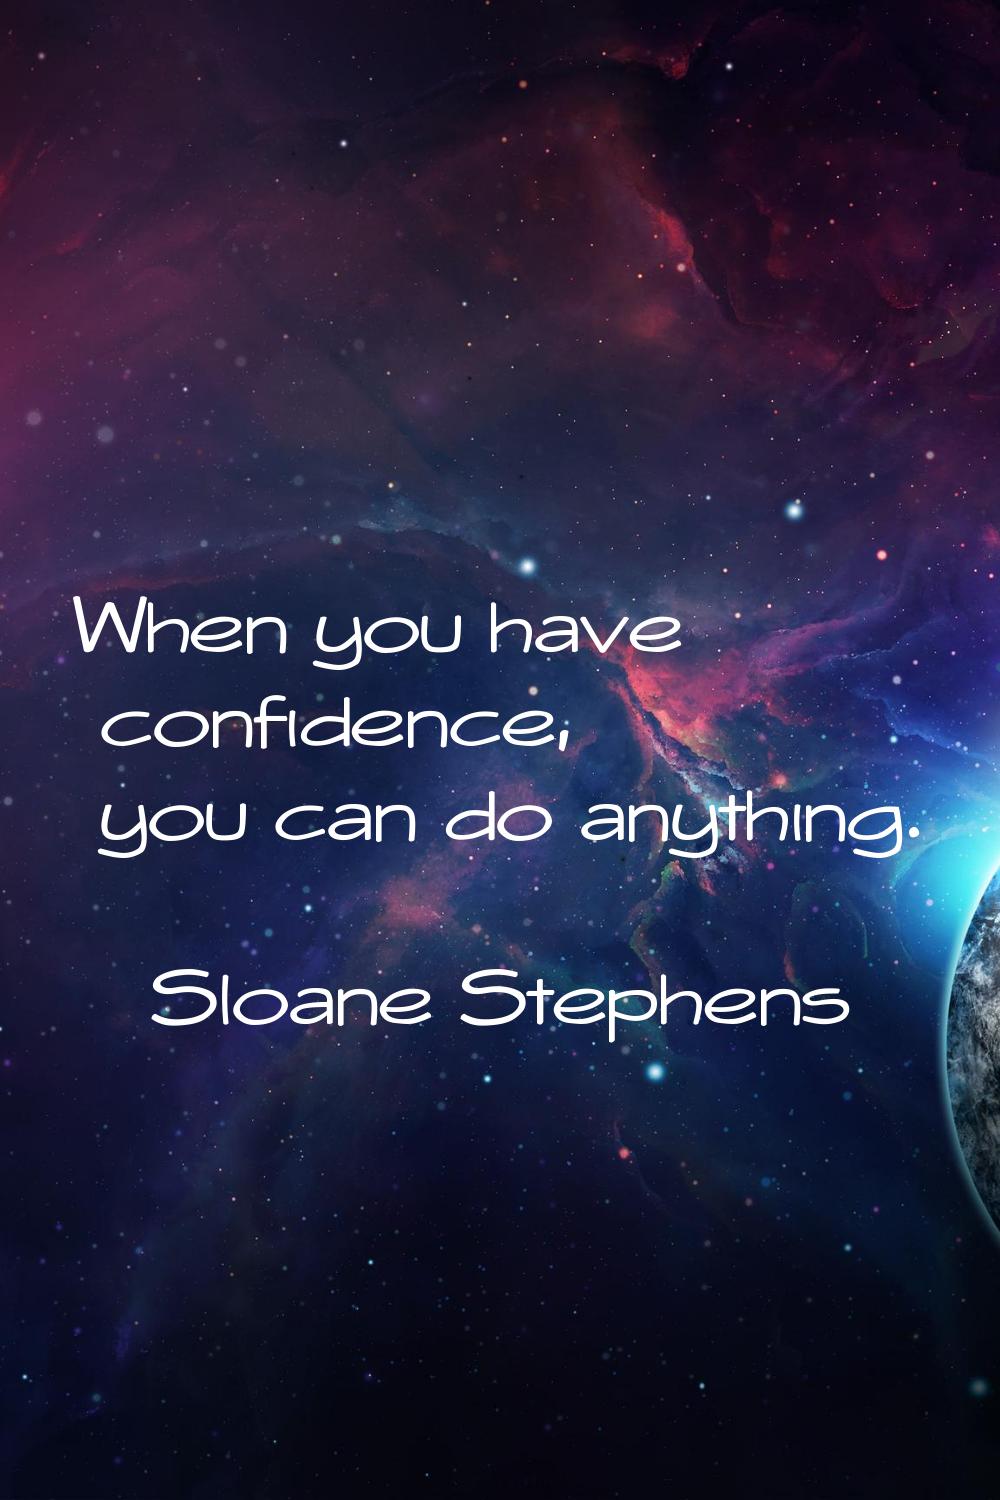 When you have confidence, you can do anything.